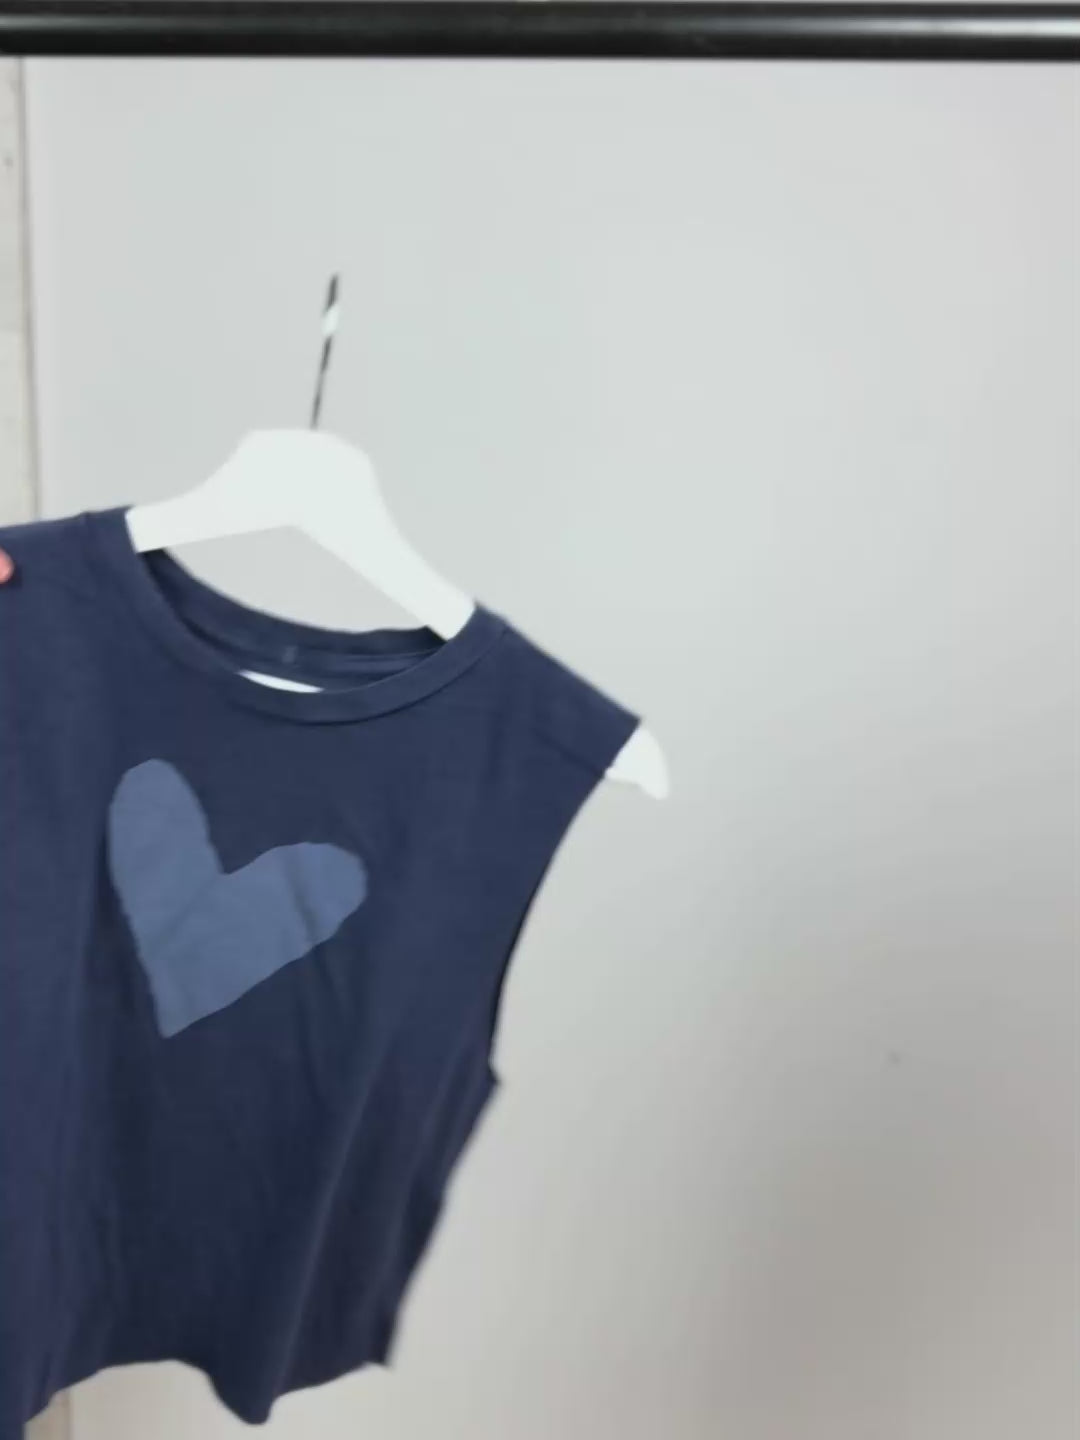 Blue Crop top with white heart, 360 video